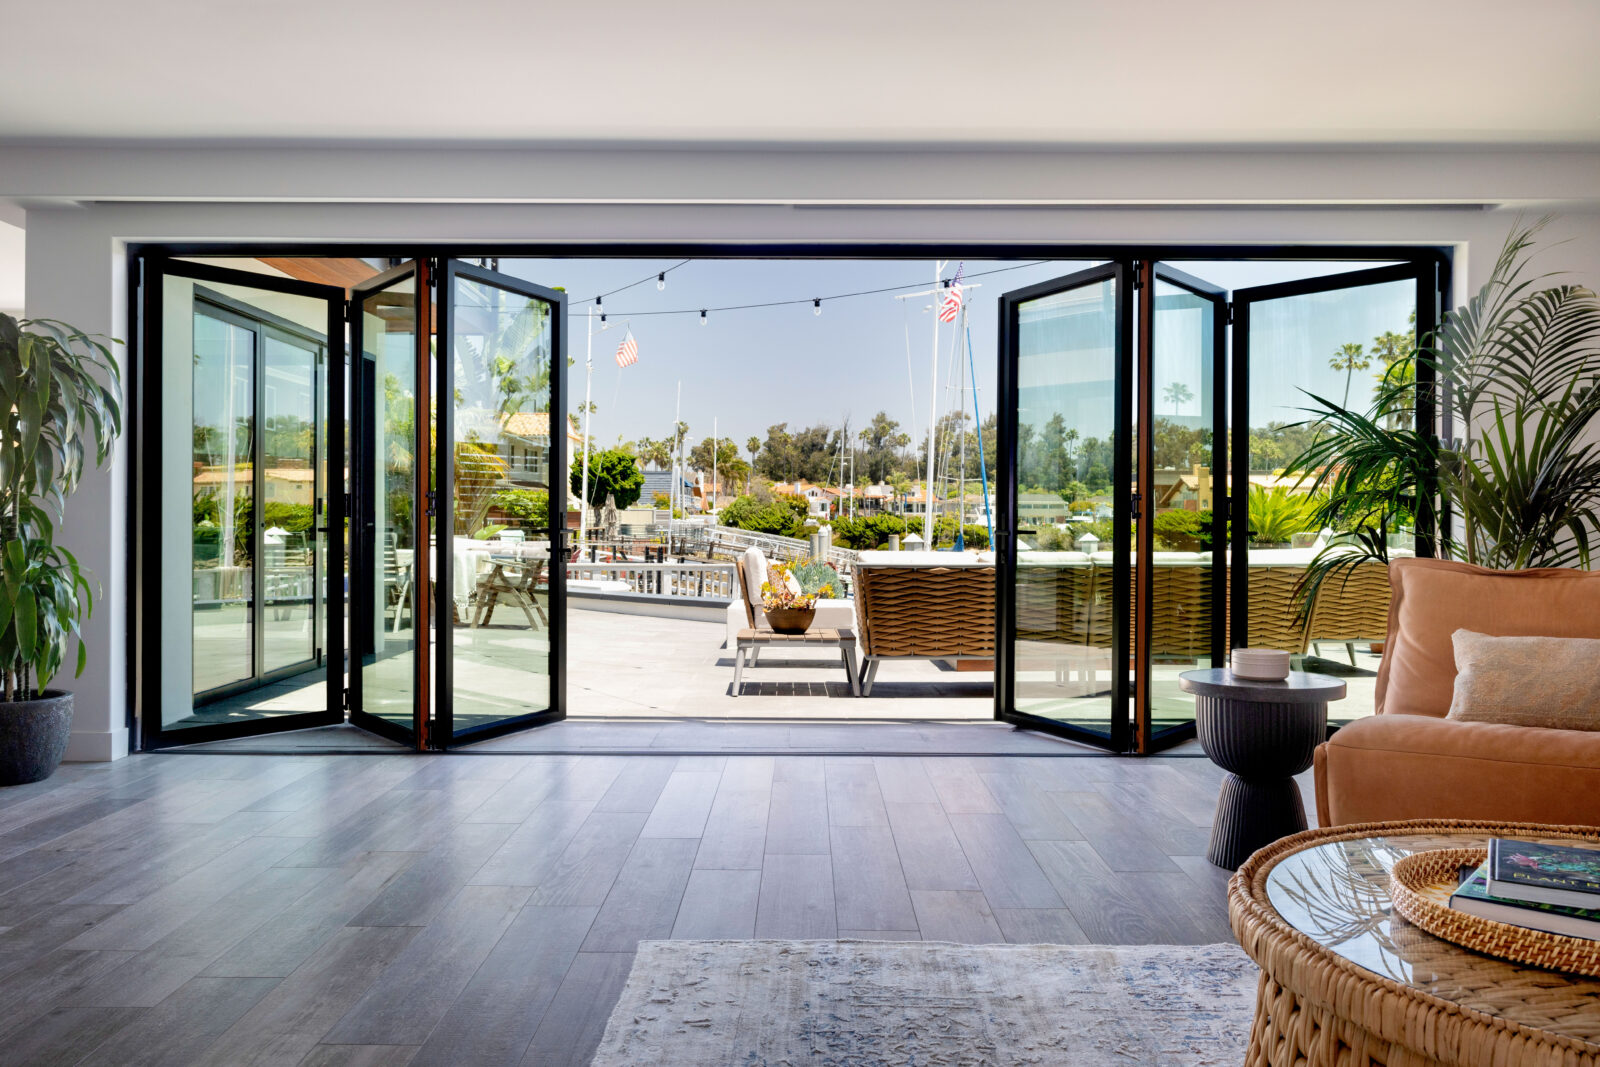 AG Millworks® Bi-Fold Doors available at Westside Door: Orange County, Southern California AG Millworks® Authorized Dealer. Westside Door serves West Los Angeles and the Southern California area. Also serving Orange County, South Bay, Beverly Hills, Malibu, West Los Angeles and all of Southern California. Call us: (310) 478-0311